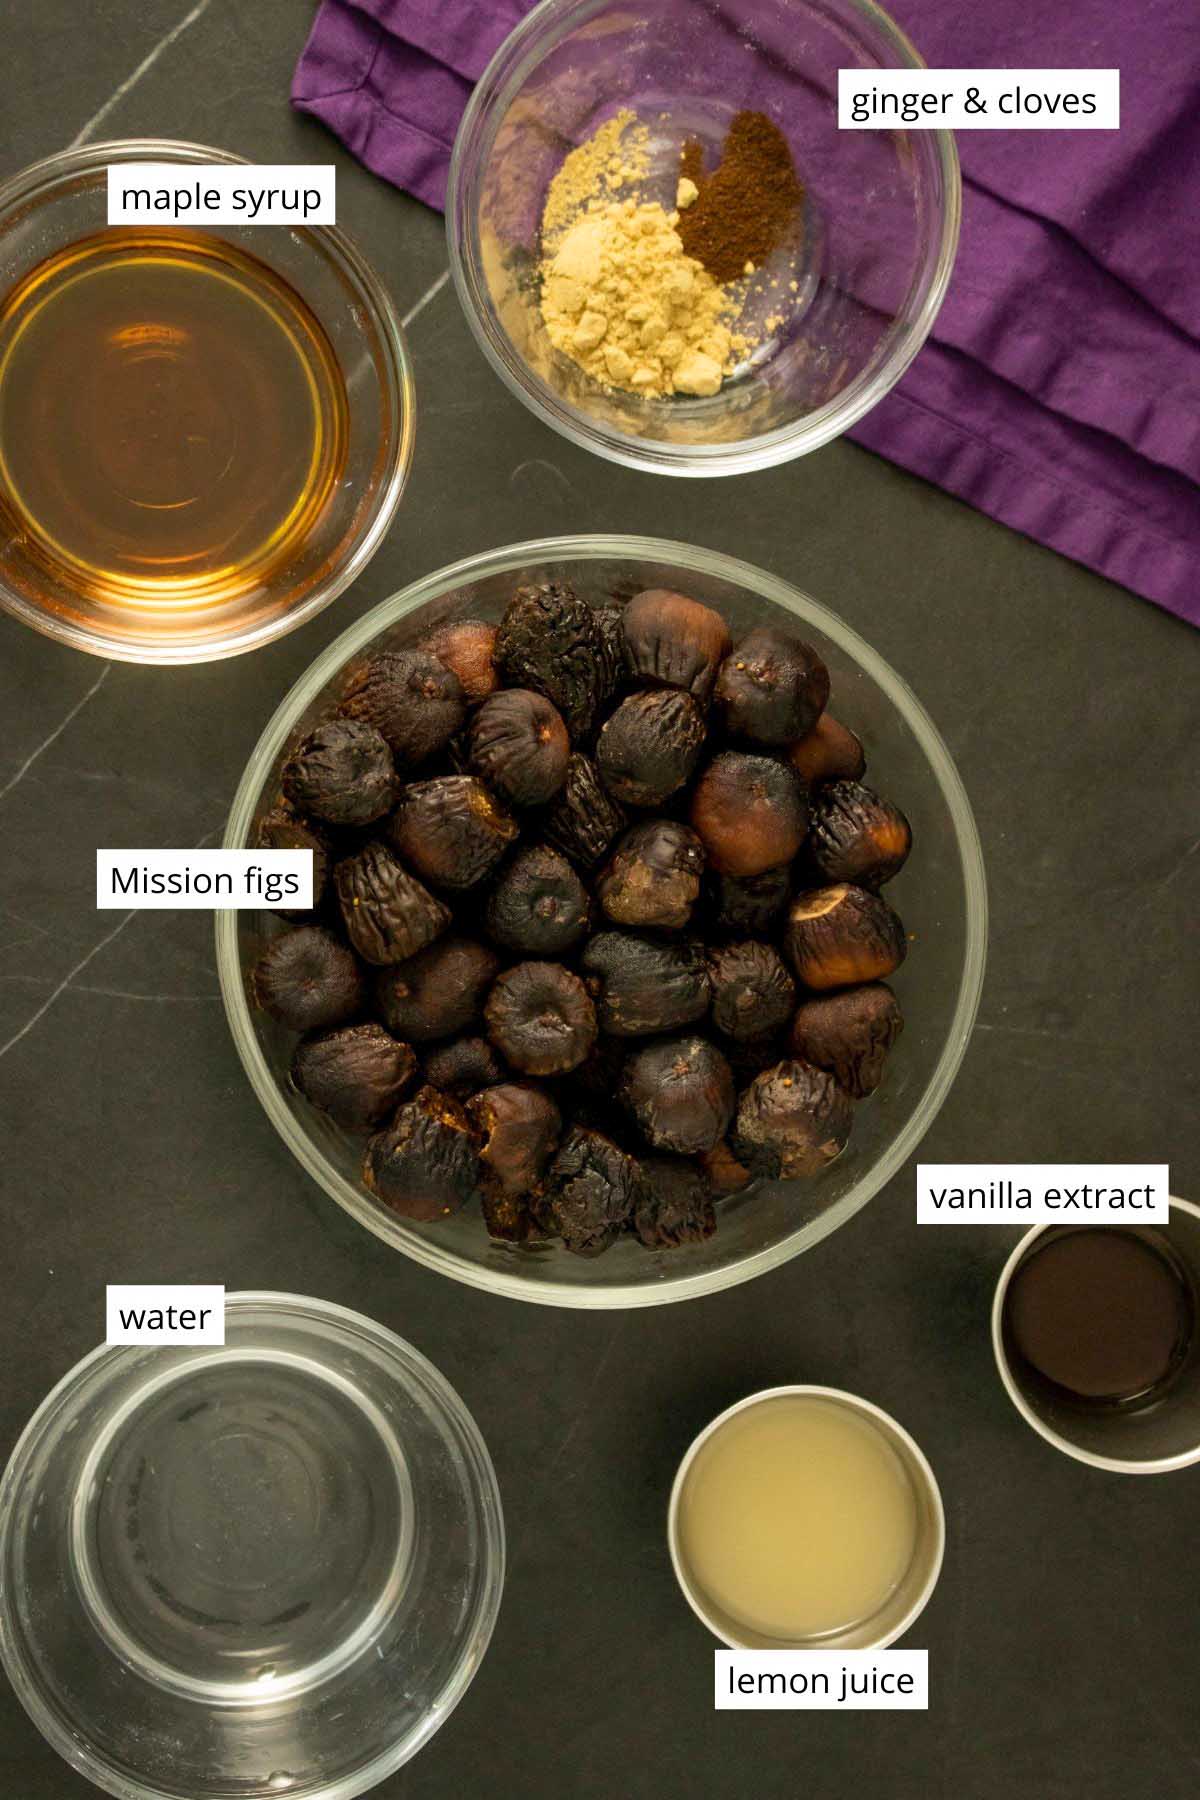 Mission figs in a bowl on a table surrounded by bowls with the other jam ingredients. Text labels on each ingredient.